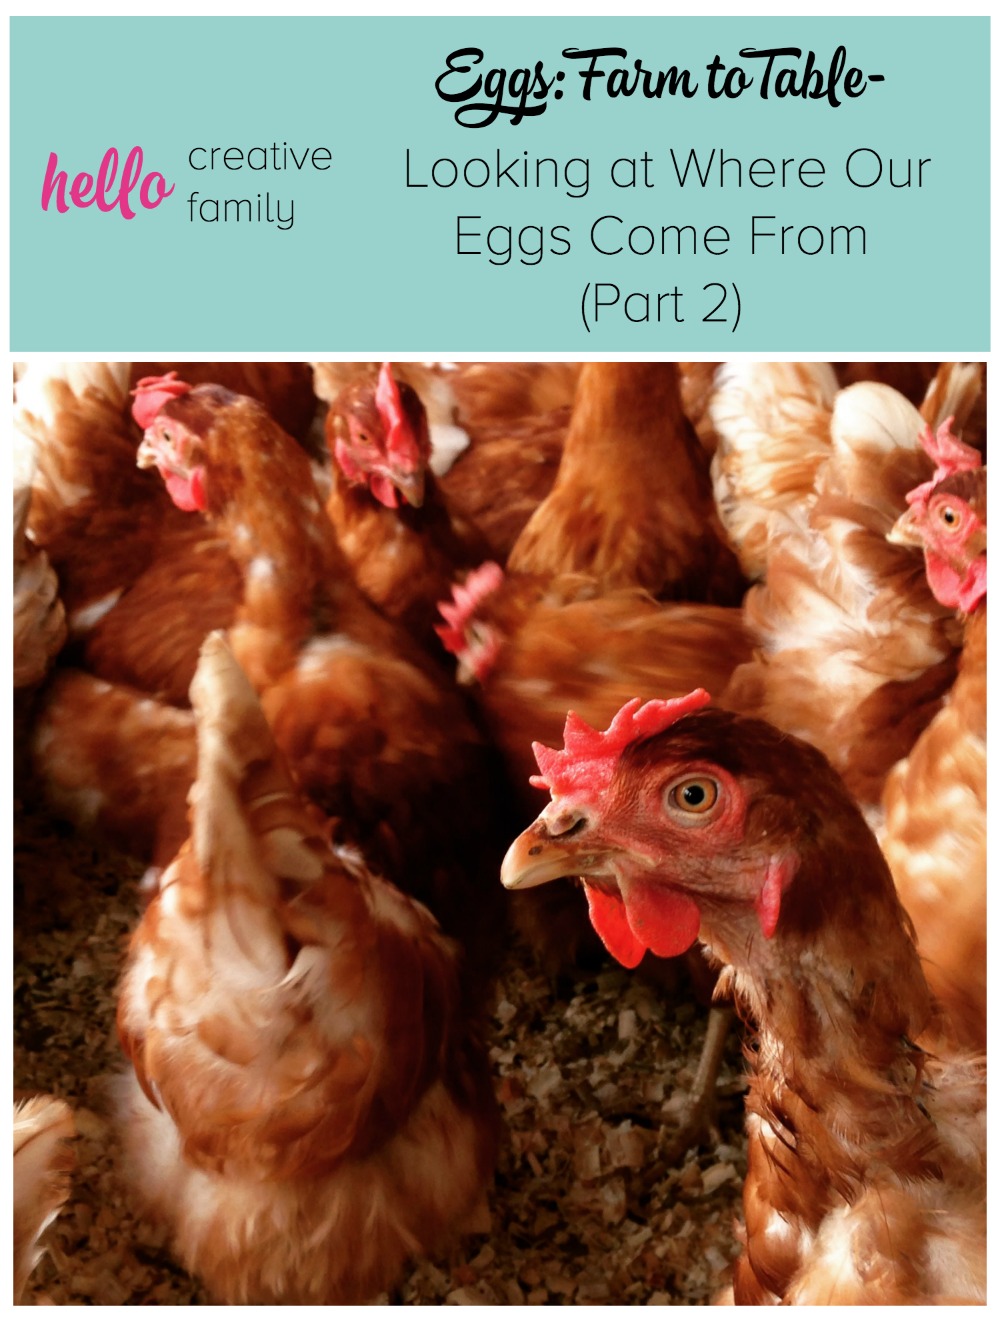 Eggs: Farm to Table- Looking at Where Our Eggs Come From (Part 2)